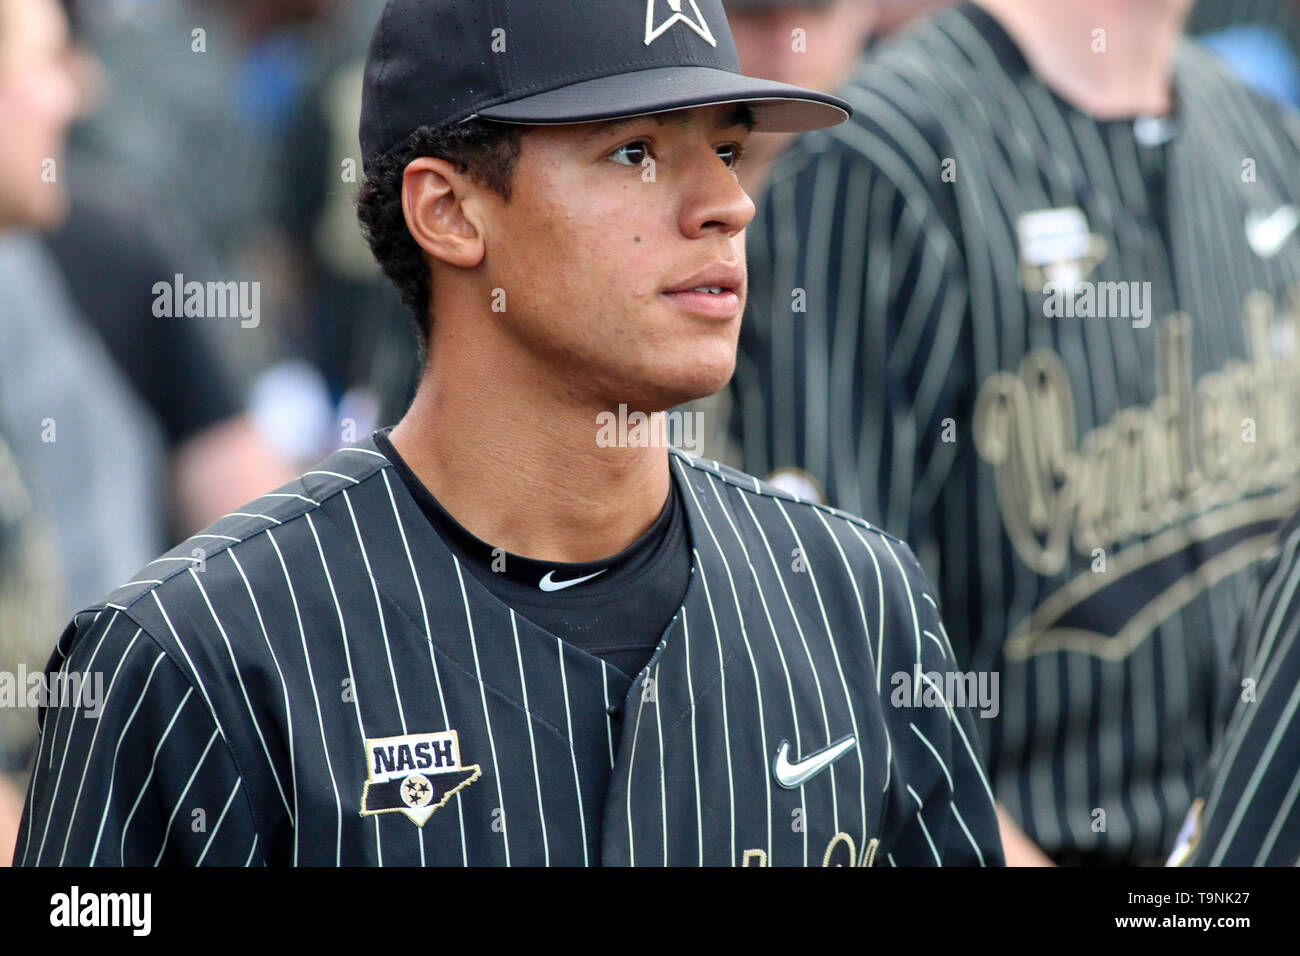 lexington-ky-usa-17th-may-2019-vanderbilts-isaiah-thomas-during-a-game-between-the-kentucky-wildcats-and-the-vanderbilt-commodores-at-kentucky-pride-park-in-lexington-ky-kevin-schultzcsmalamy-live-news-T9NK27.jpg